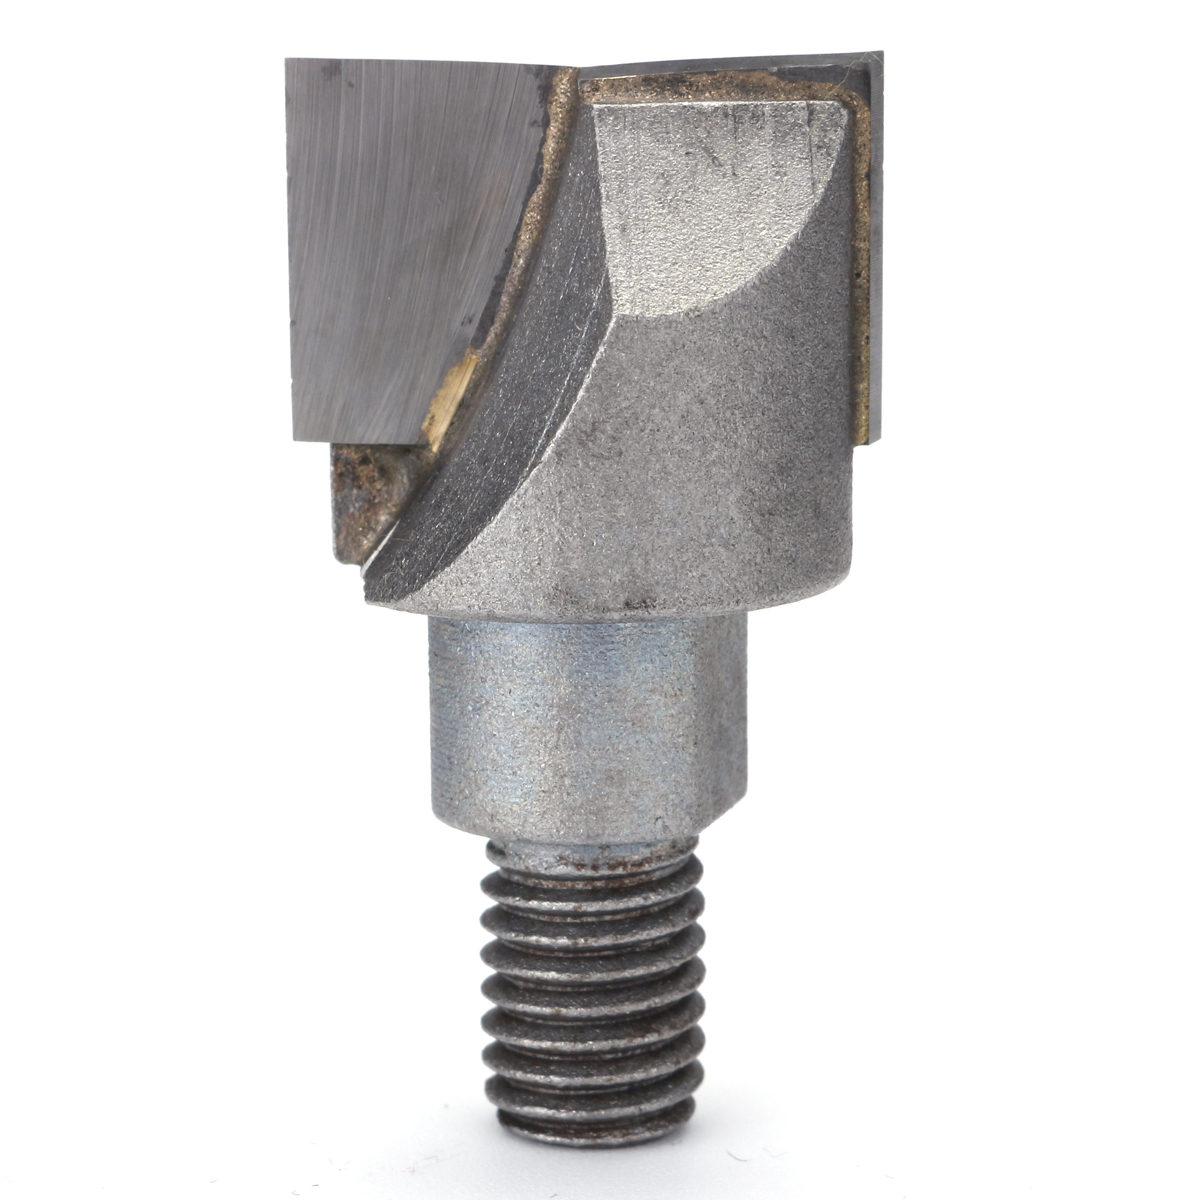 Drillpro-M10-165-30mm-Carbide-Soubers-Plunging-Cutter-Wood-Cutter-for-Soubers-Mortice-Lock-Fitting-J-1595958-5